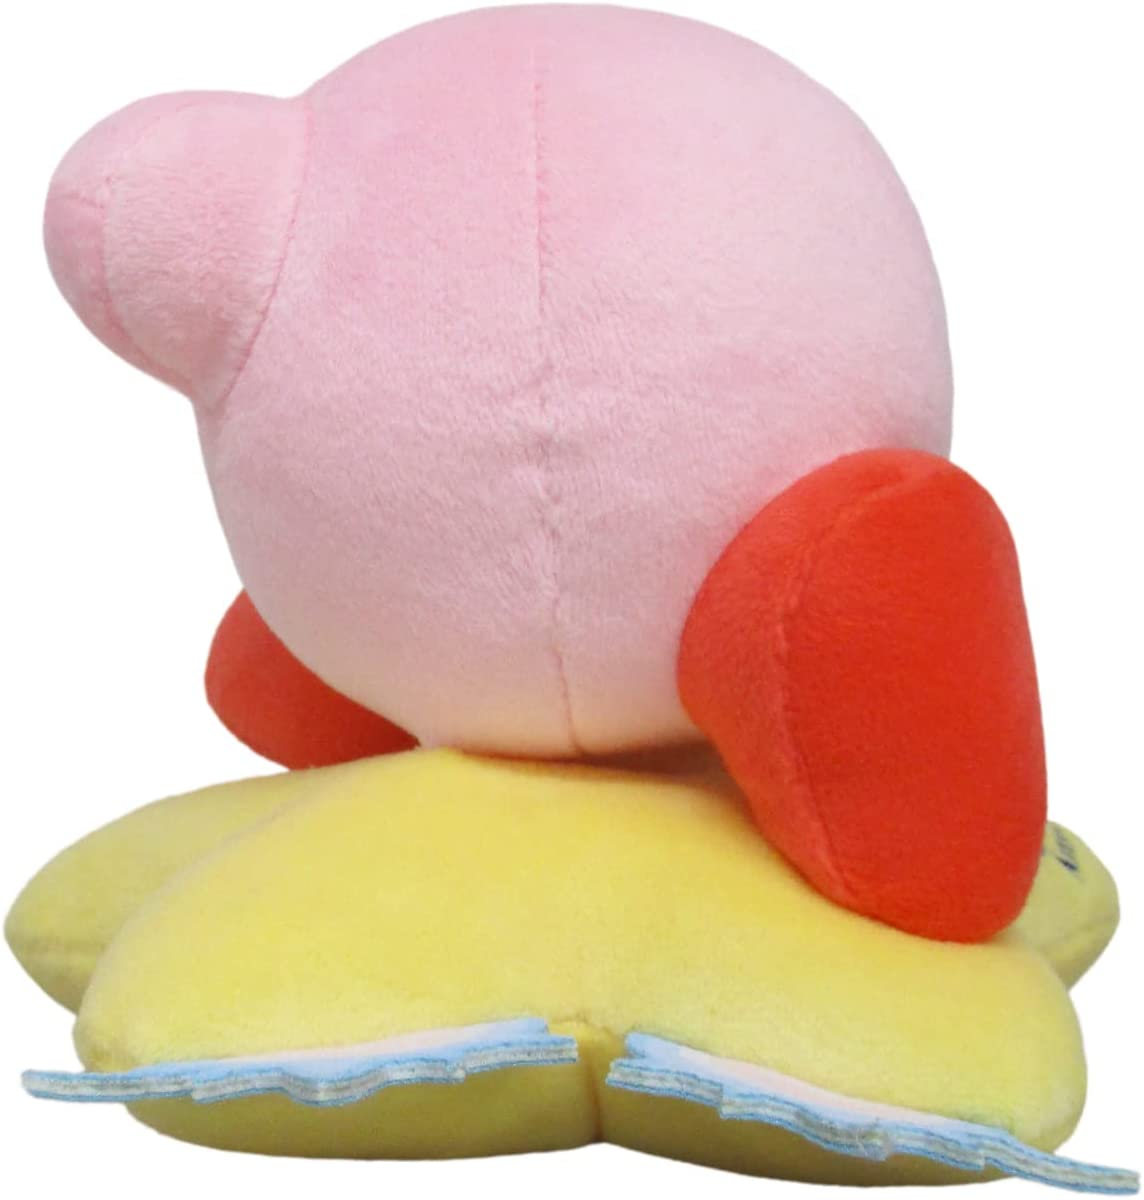 KIRBY'S AIR RIDE - KIRBY Launch 30th Anniversary Sanei Plush Toy (3.7 in) NEW!